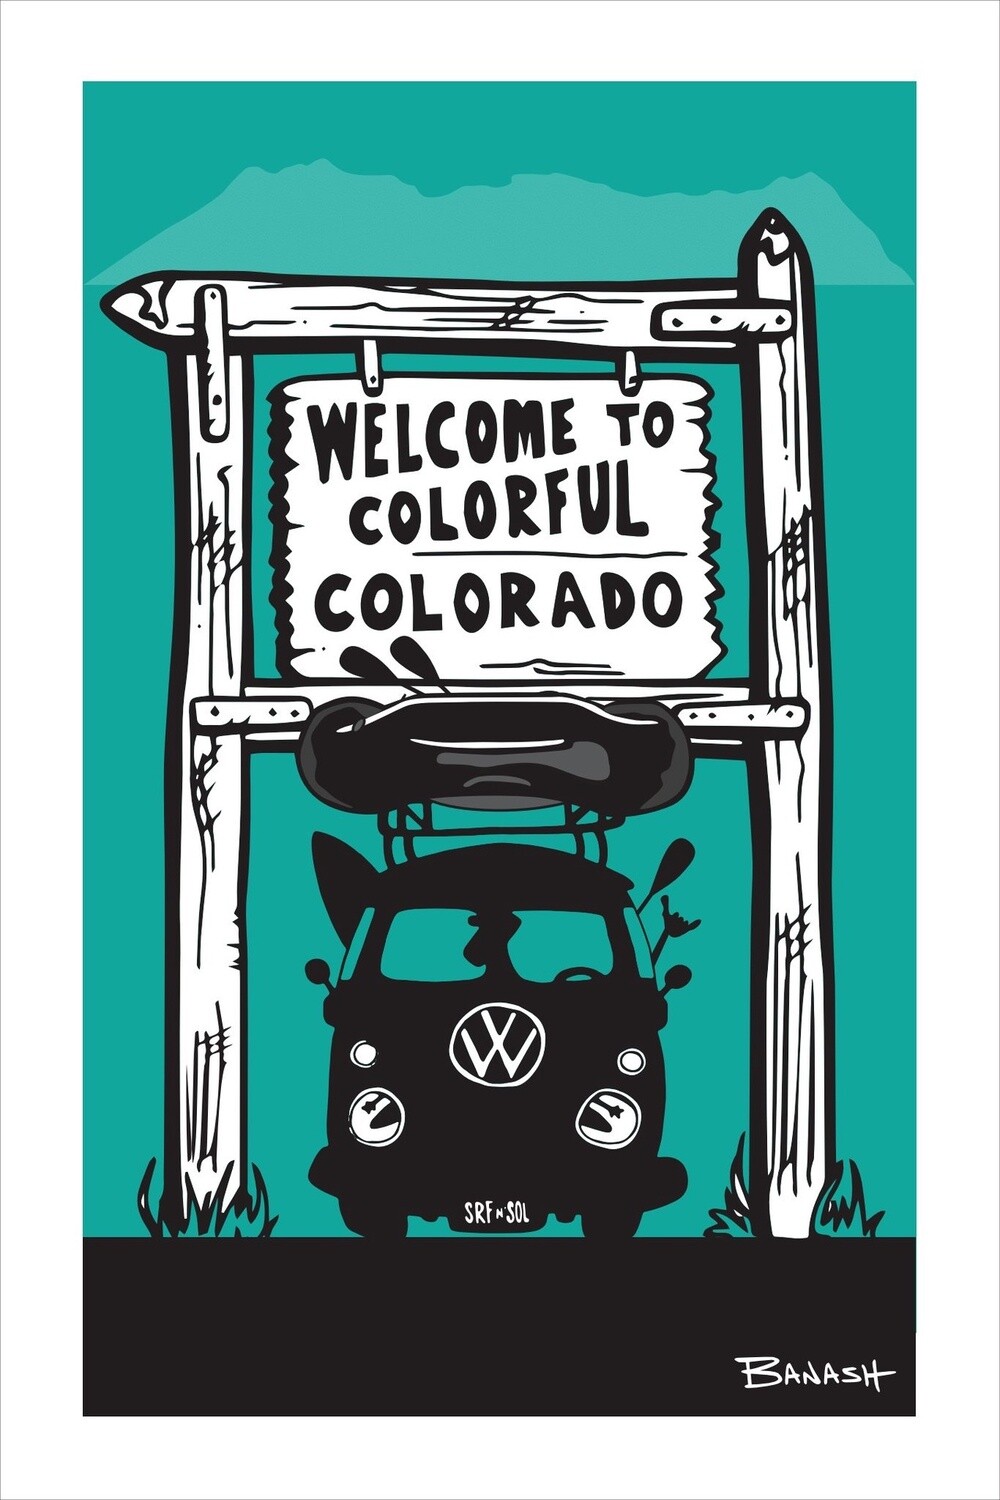 WELCOME SIGN RAFT BUS GRILL | LOOSE PRINT | 2:3 RATIO | 1:3 RATIO | LIFESTYLE | ILLUSTRATION